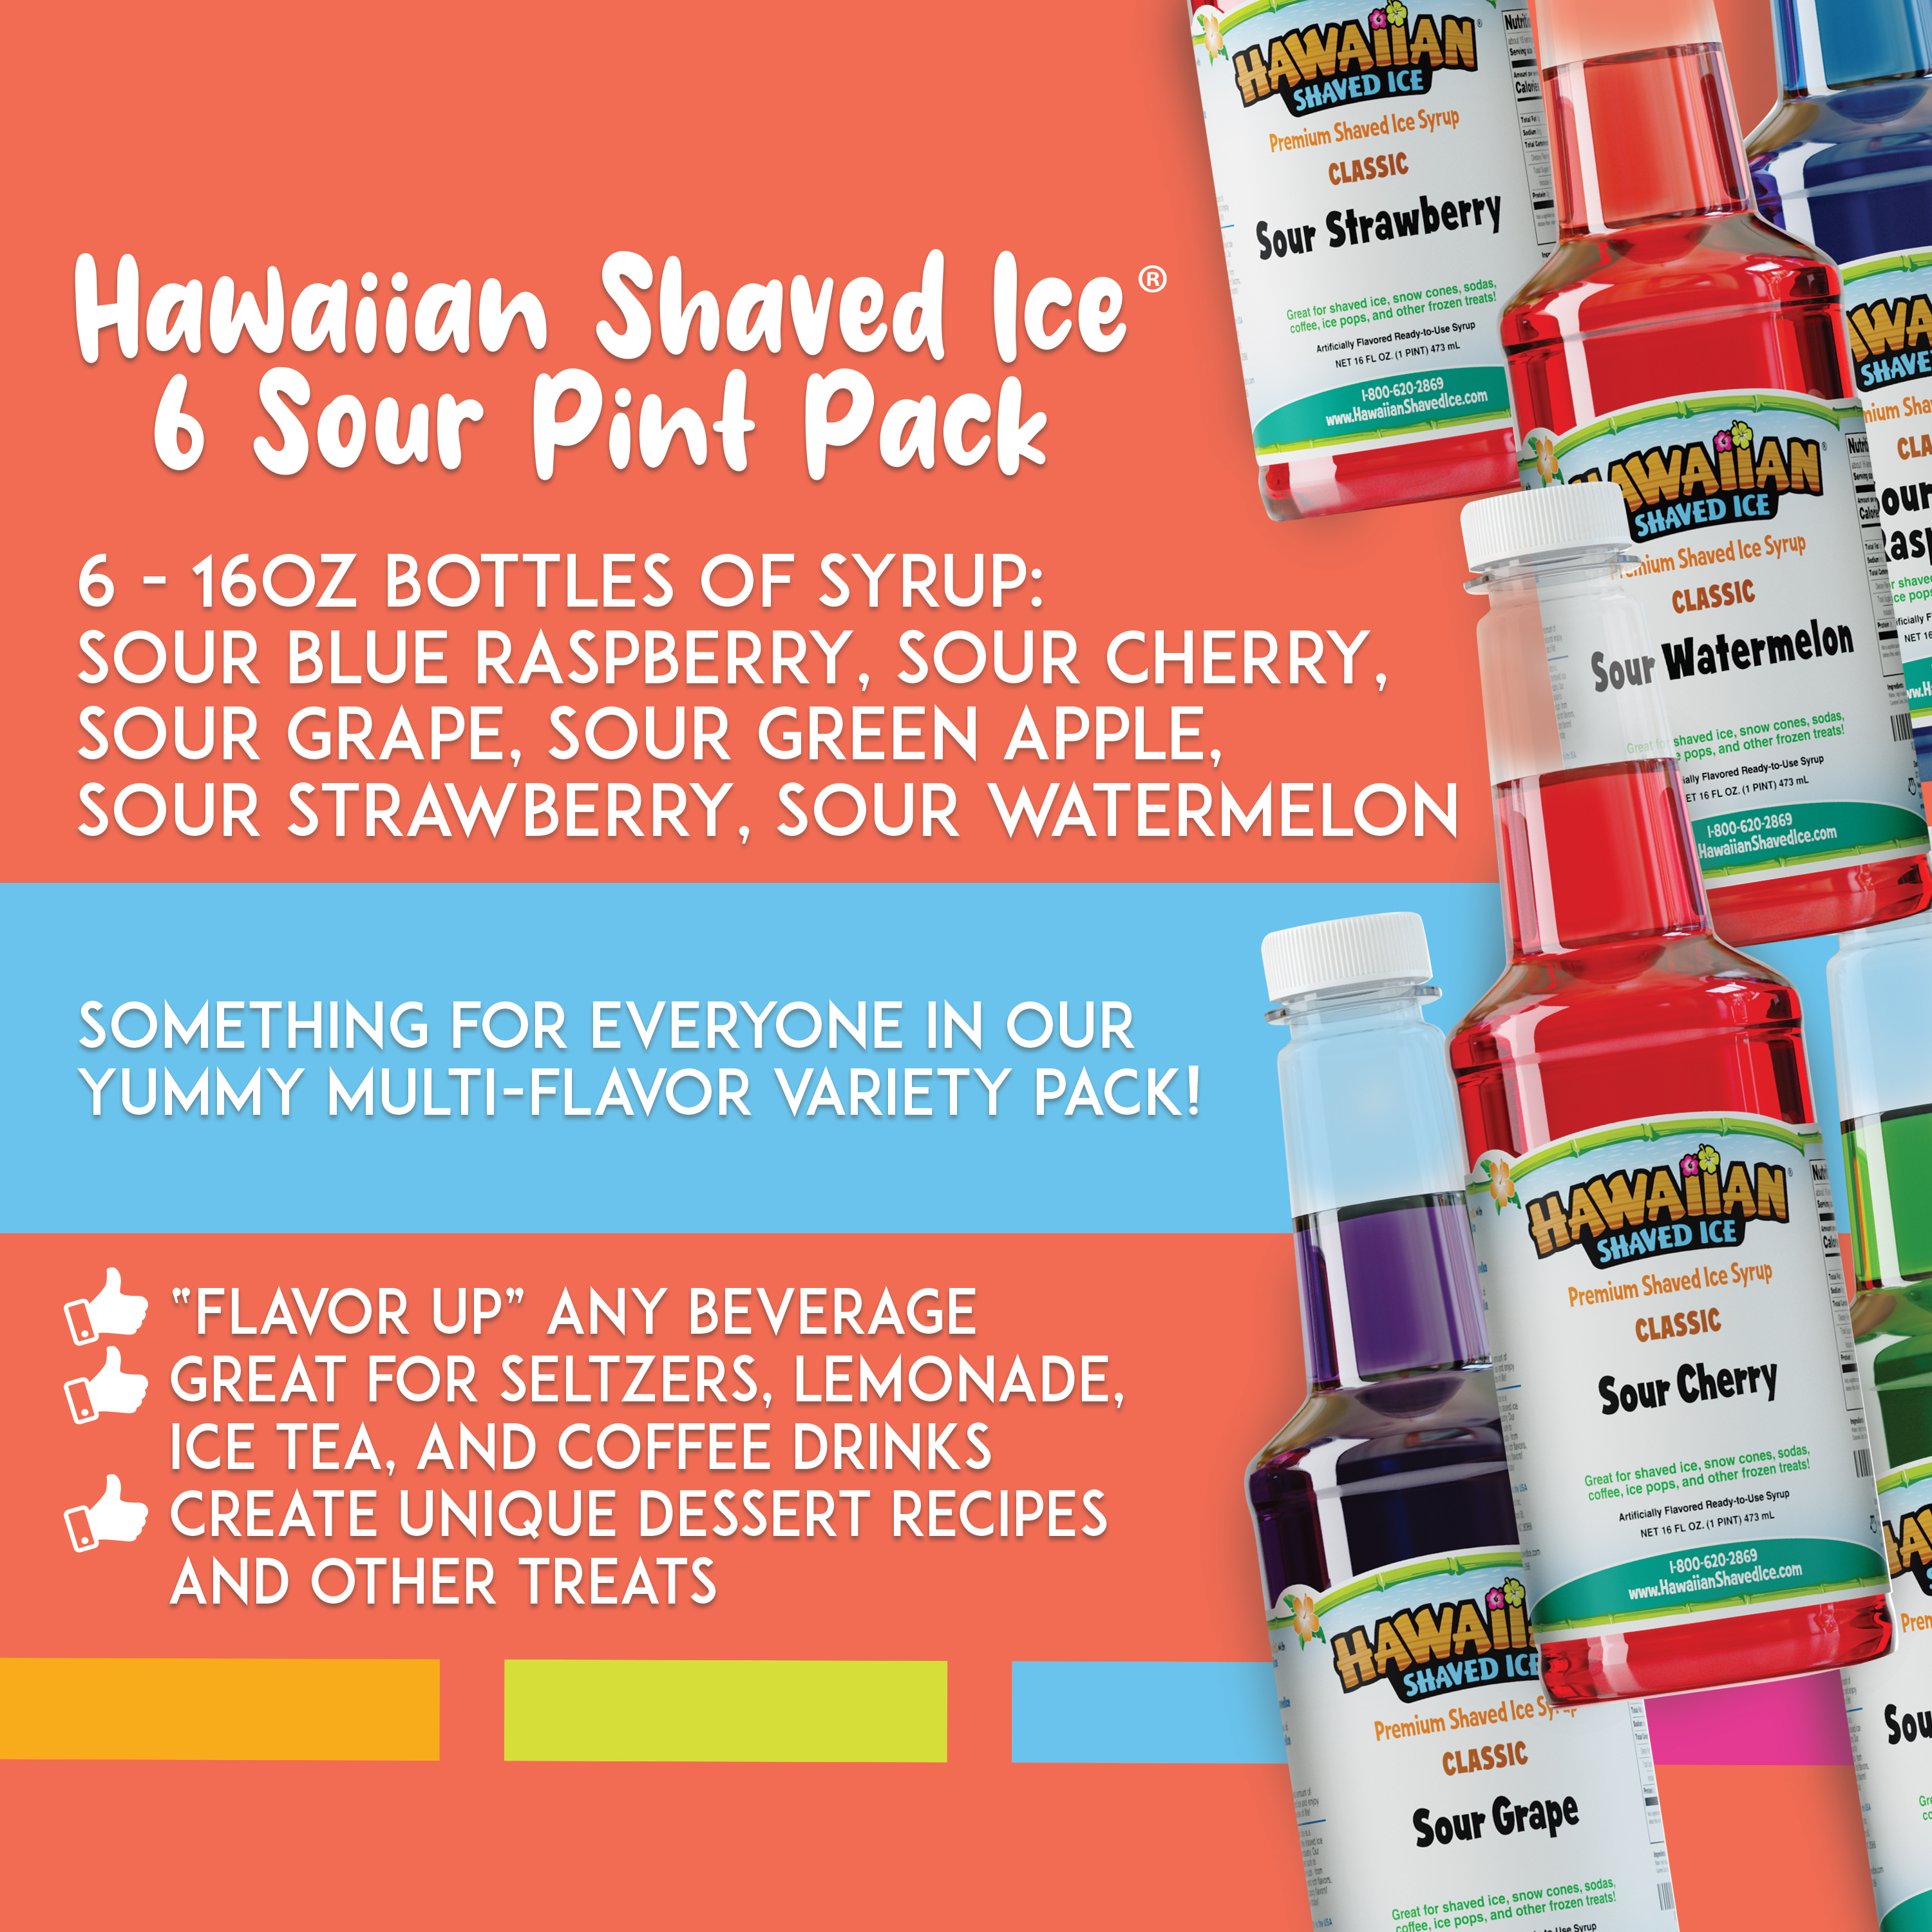 Hawaiian Shaved Ice Snow Cone Syrup Flavor Sour Pack (Pints) 